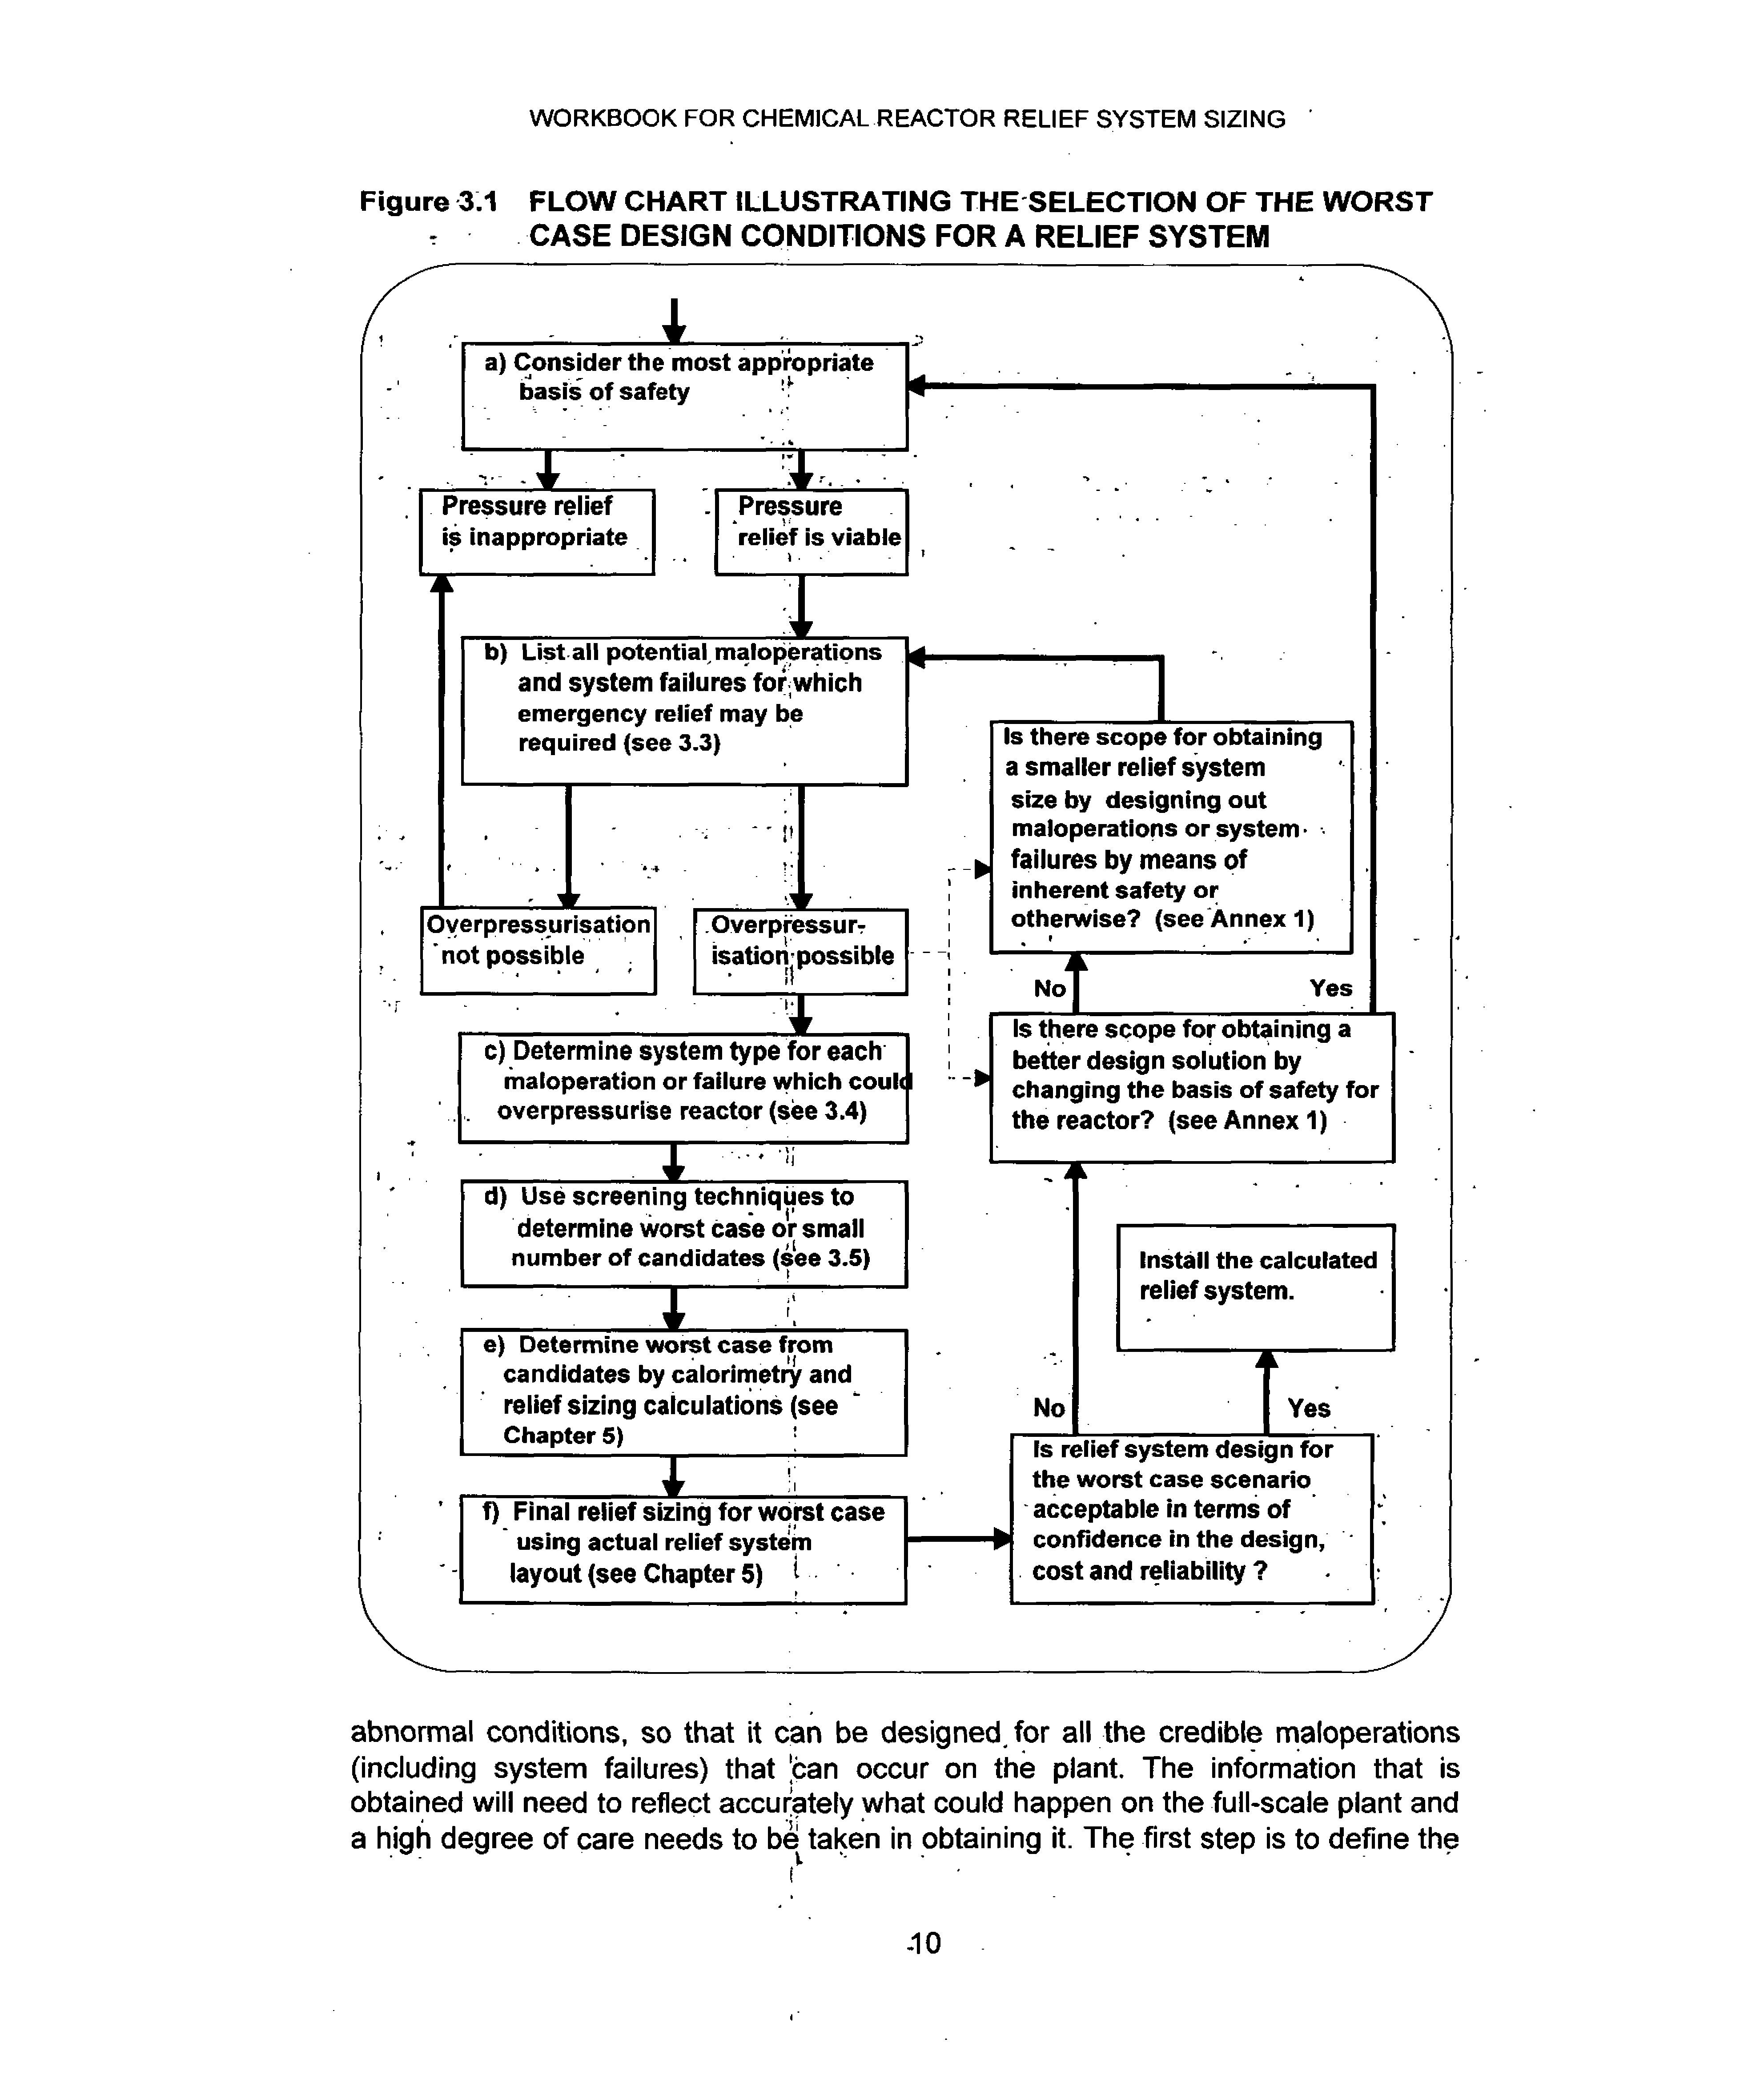 Figure 3.1 FLOW CHART ILLUSTRATING THE SELECTION OF THE WORST CASE DESIGN CONDITIONS FOR A RELIEF SYSTEM...